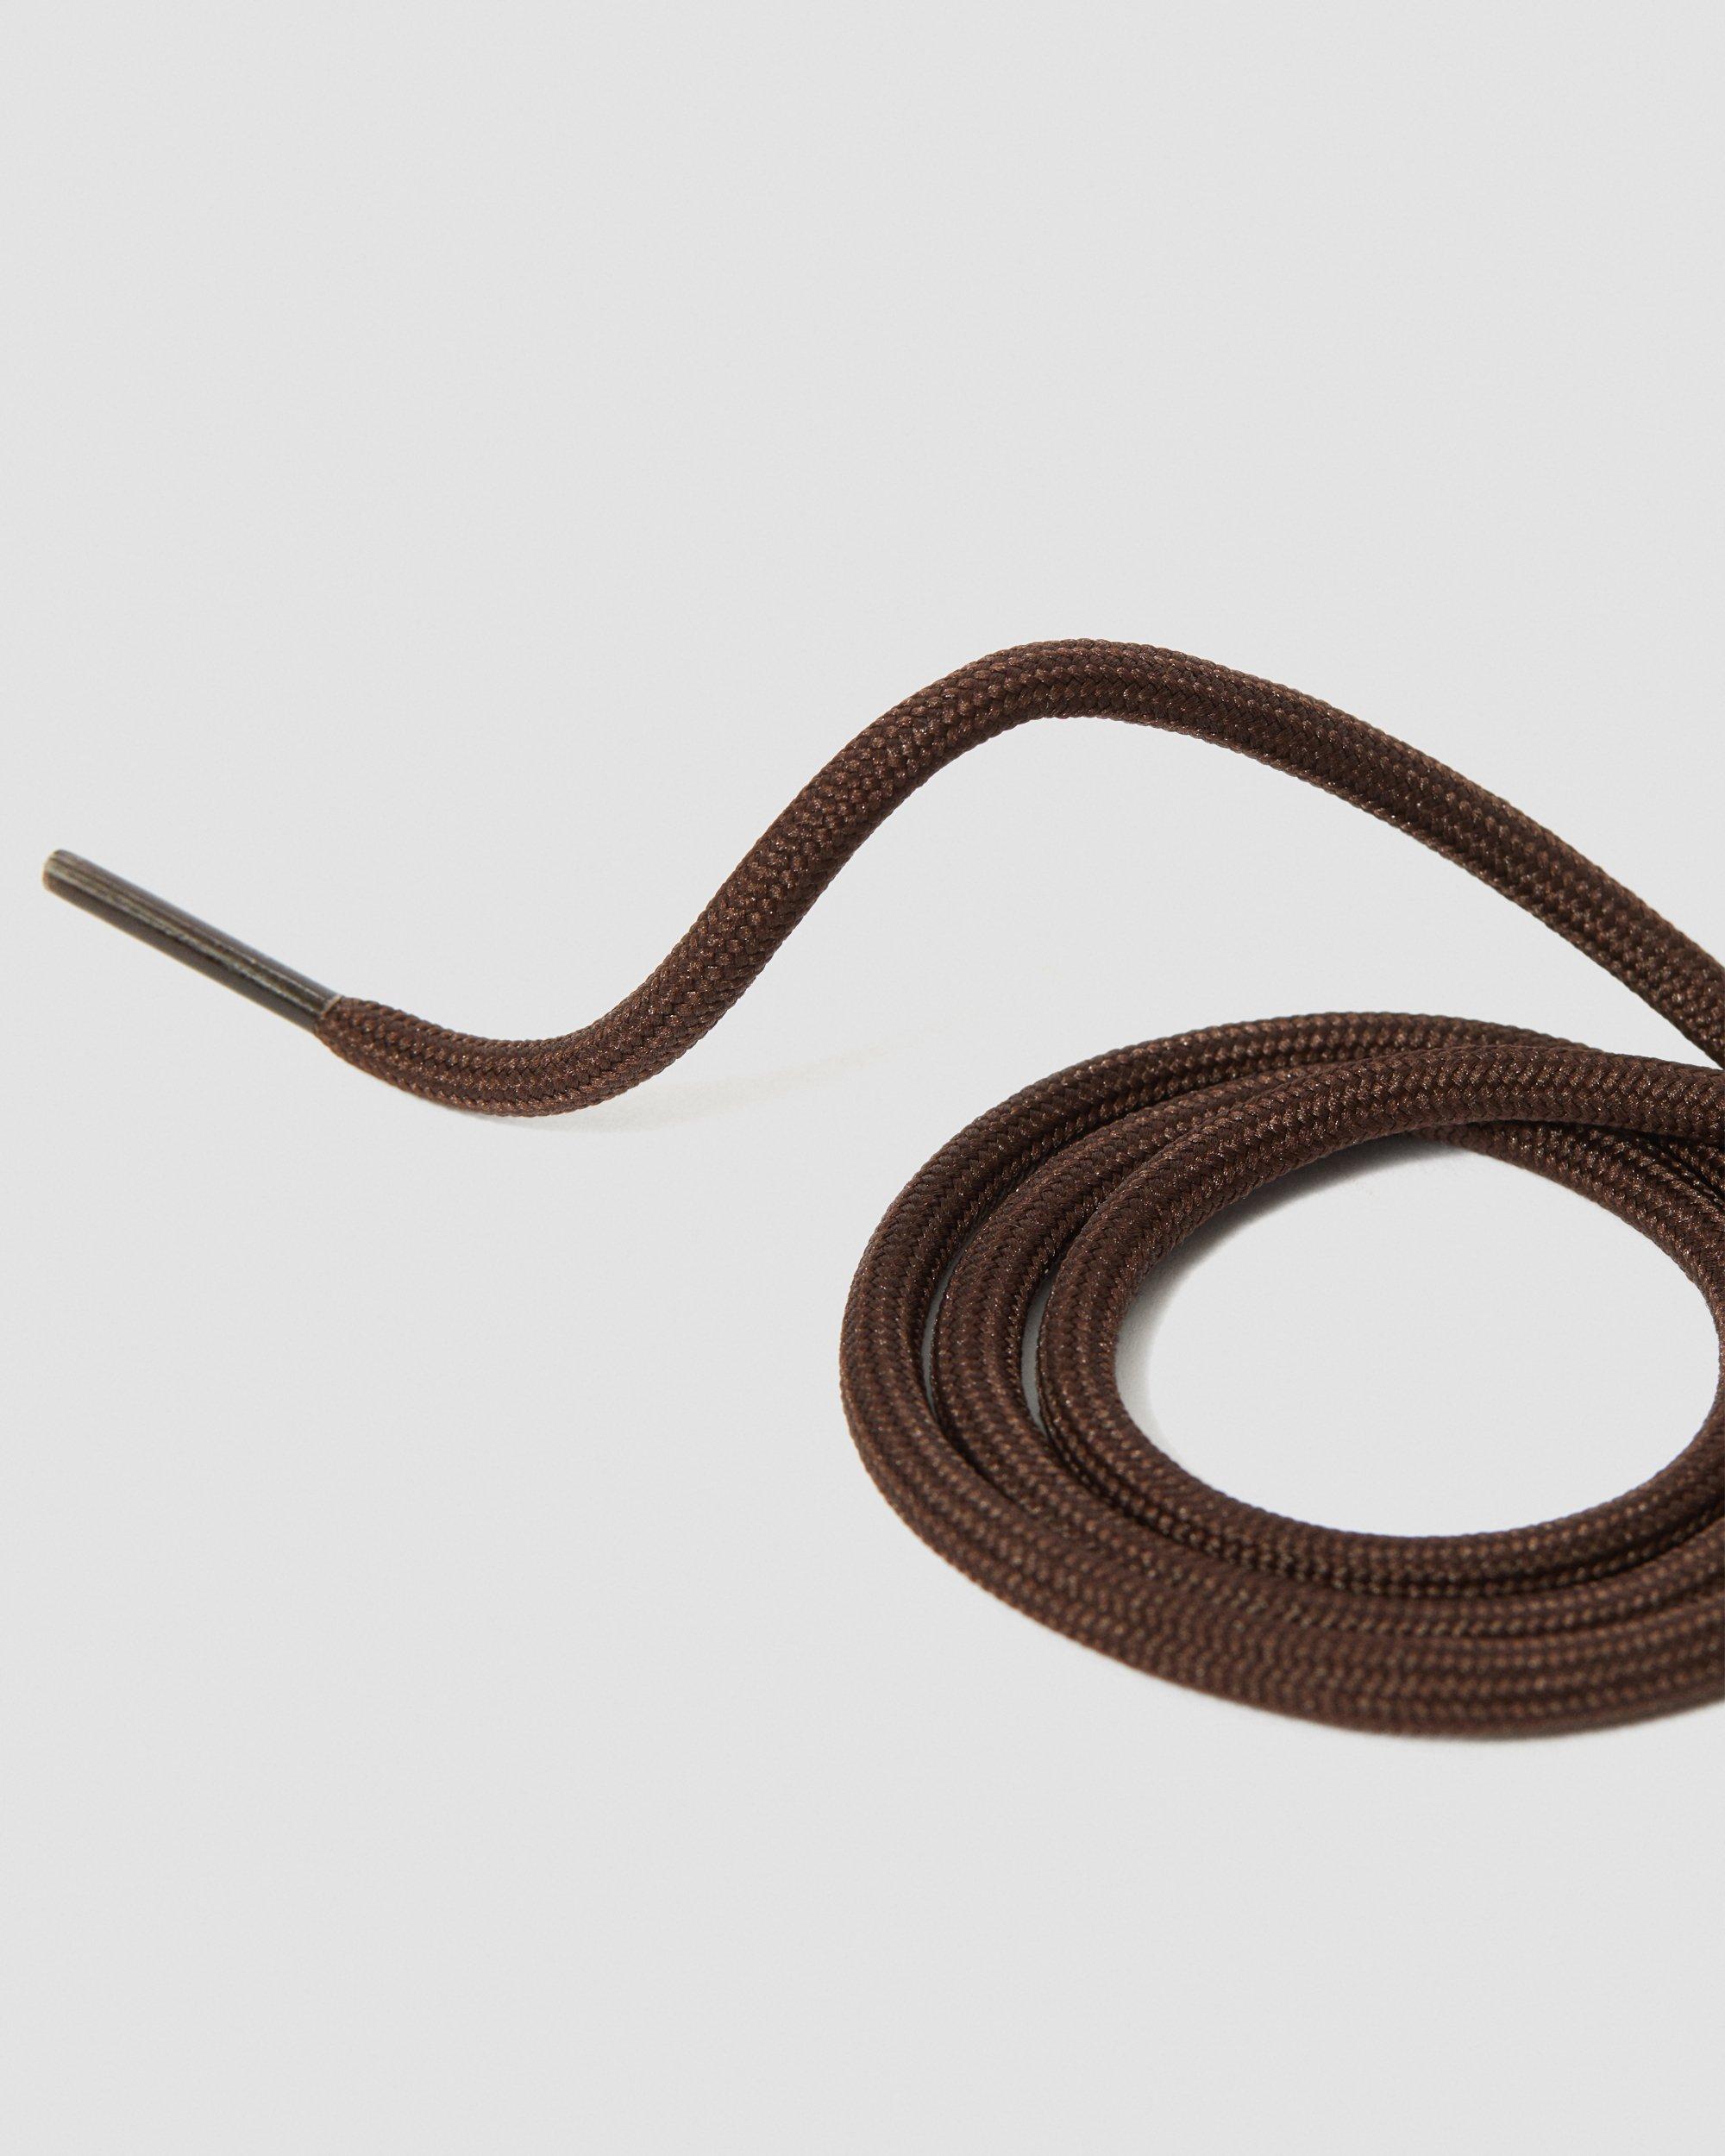 26 Inch Round Shoe Laces (3-Eye) in Brown